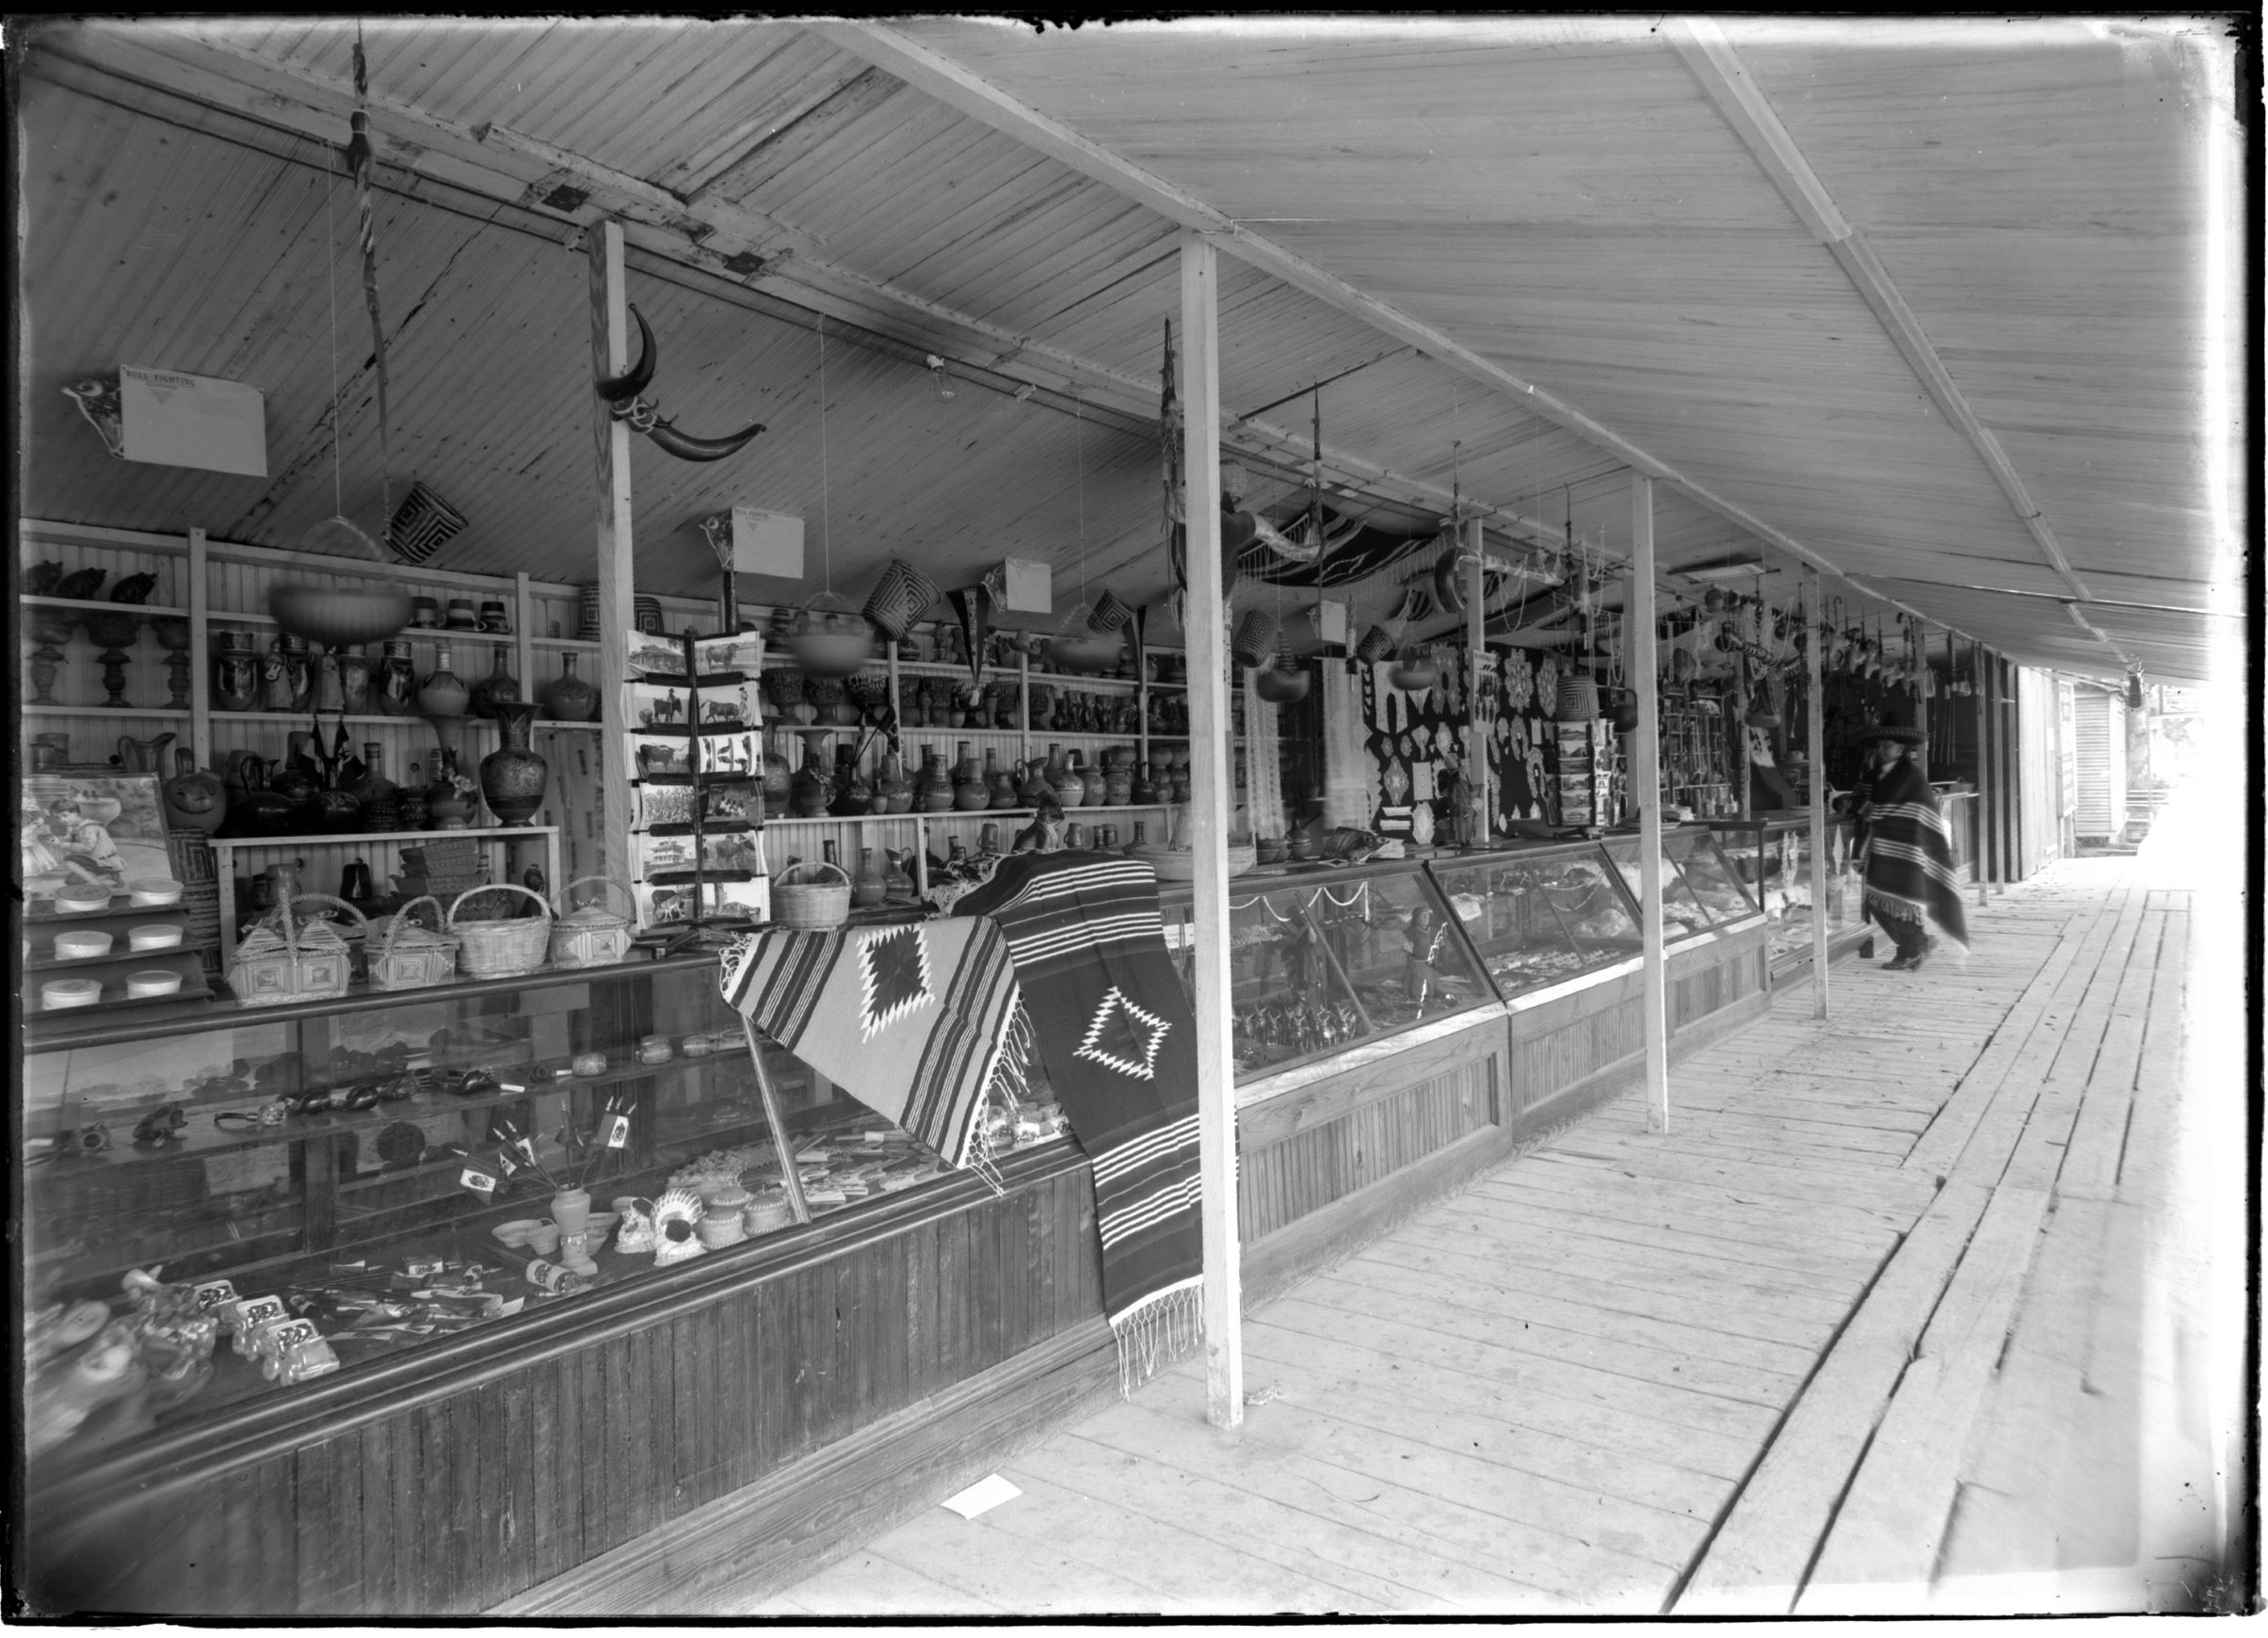 Photo of store shelves, an adult is in the foreground